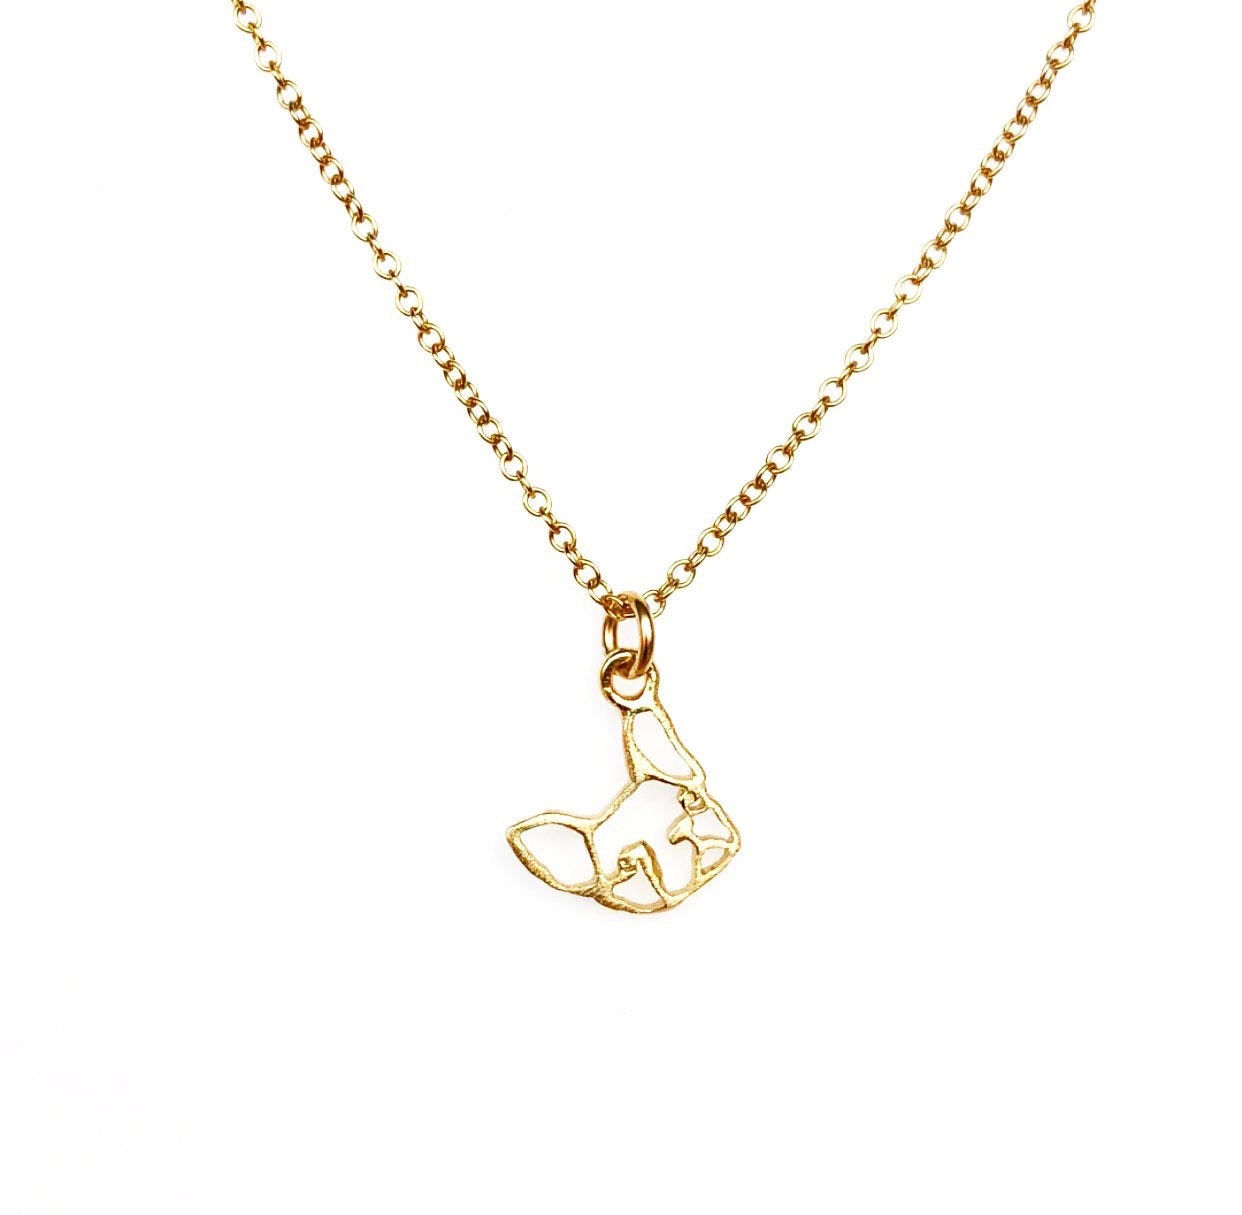 SPECIAL CAUSE: Frenchie bulldog necklace (14kt gold filled and vermeille)